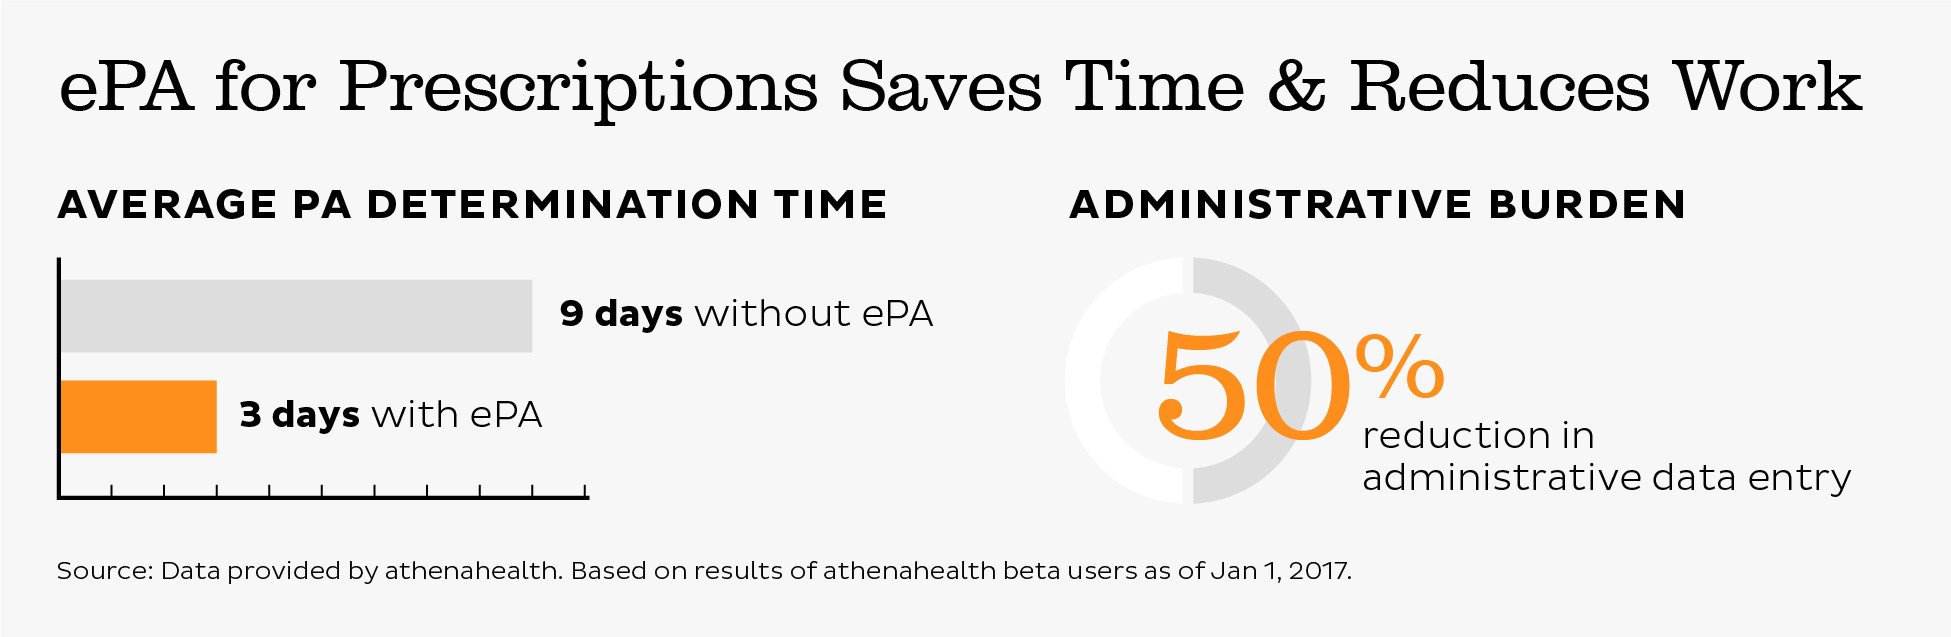 ePA for Prescriptions Saves Time & Reduces Work